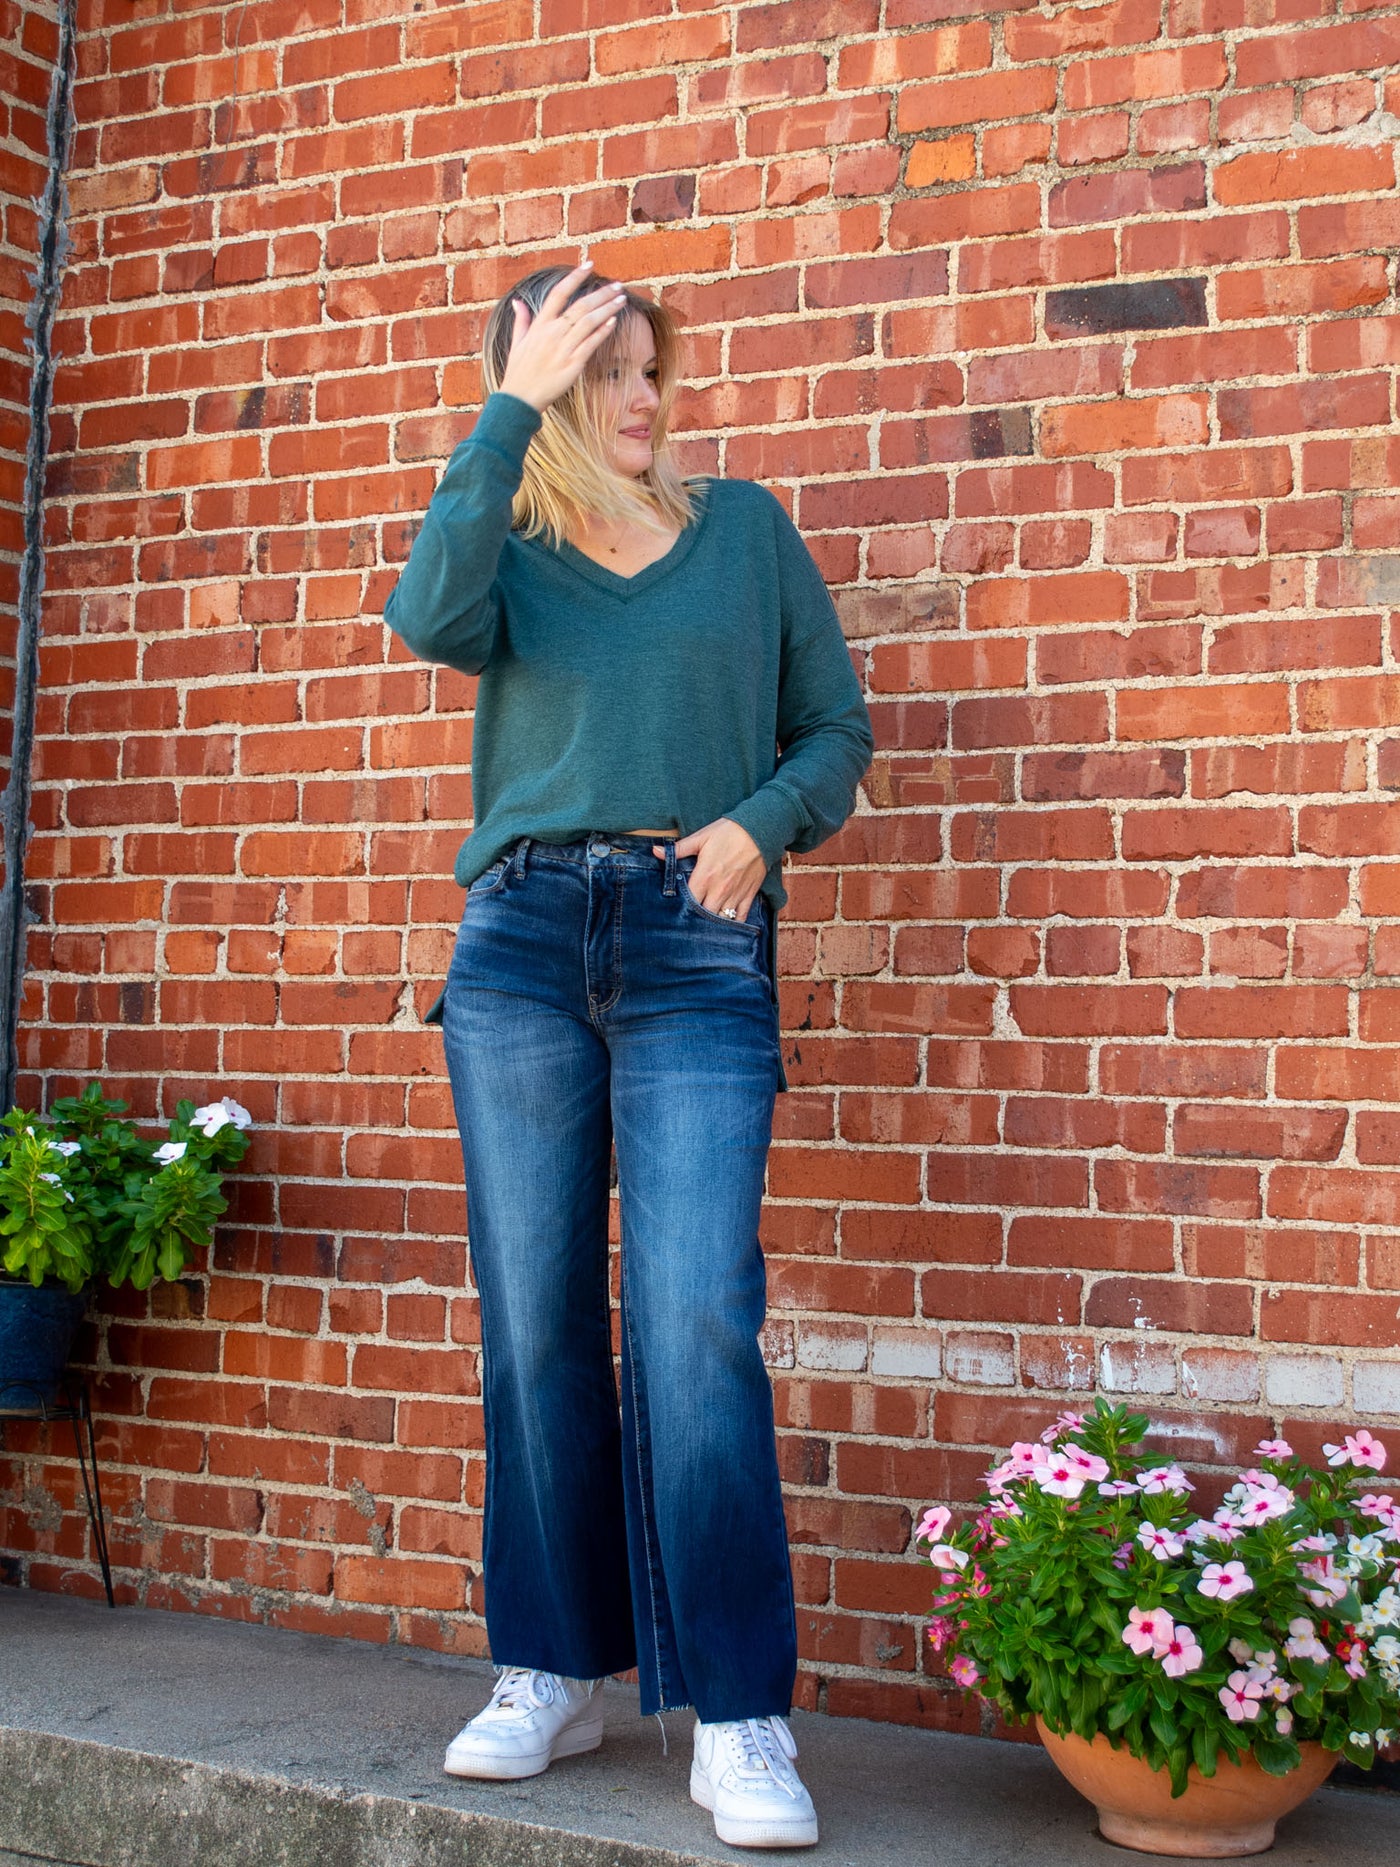 A model wearing a dark wash, faded, wide leg jean with a raw hem. The model has it paired with a teal v-neck top.